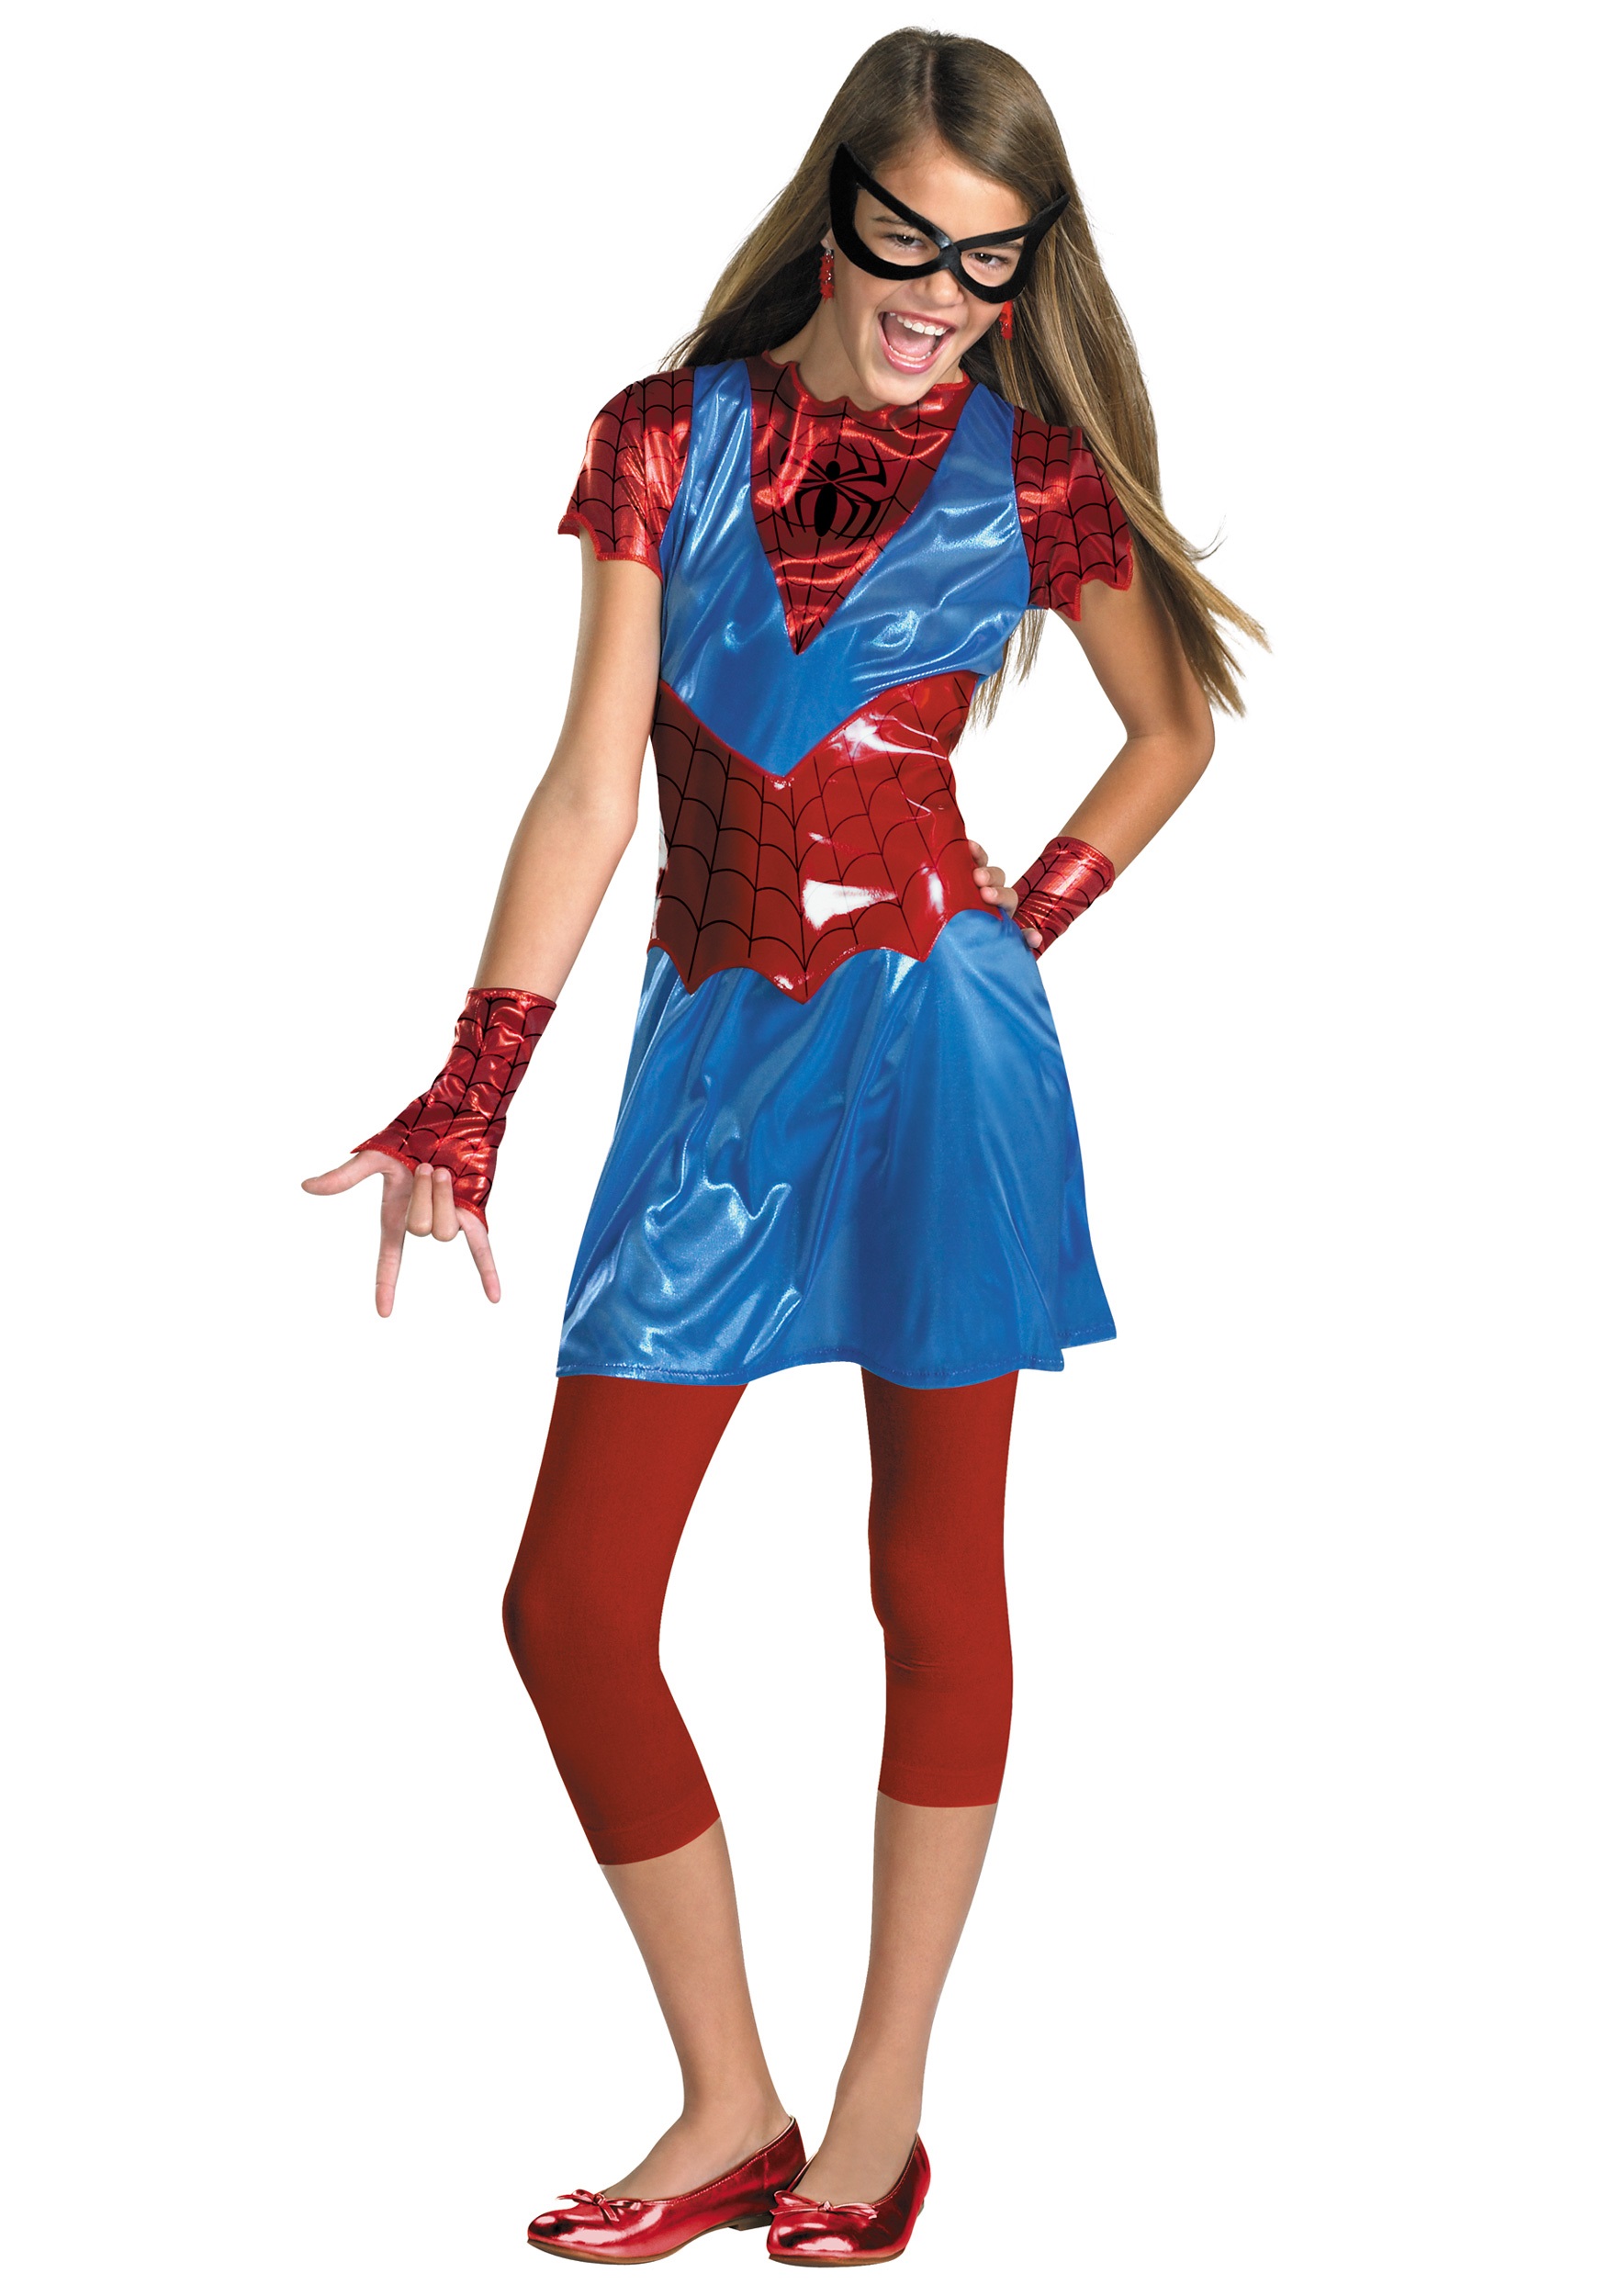 Spider Girl Costume with Free Shipping in U.S., UK, Europe, Canada | Order ...